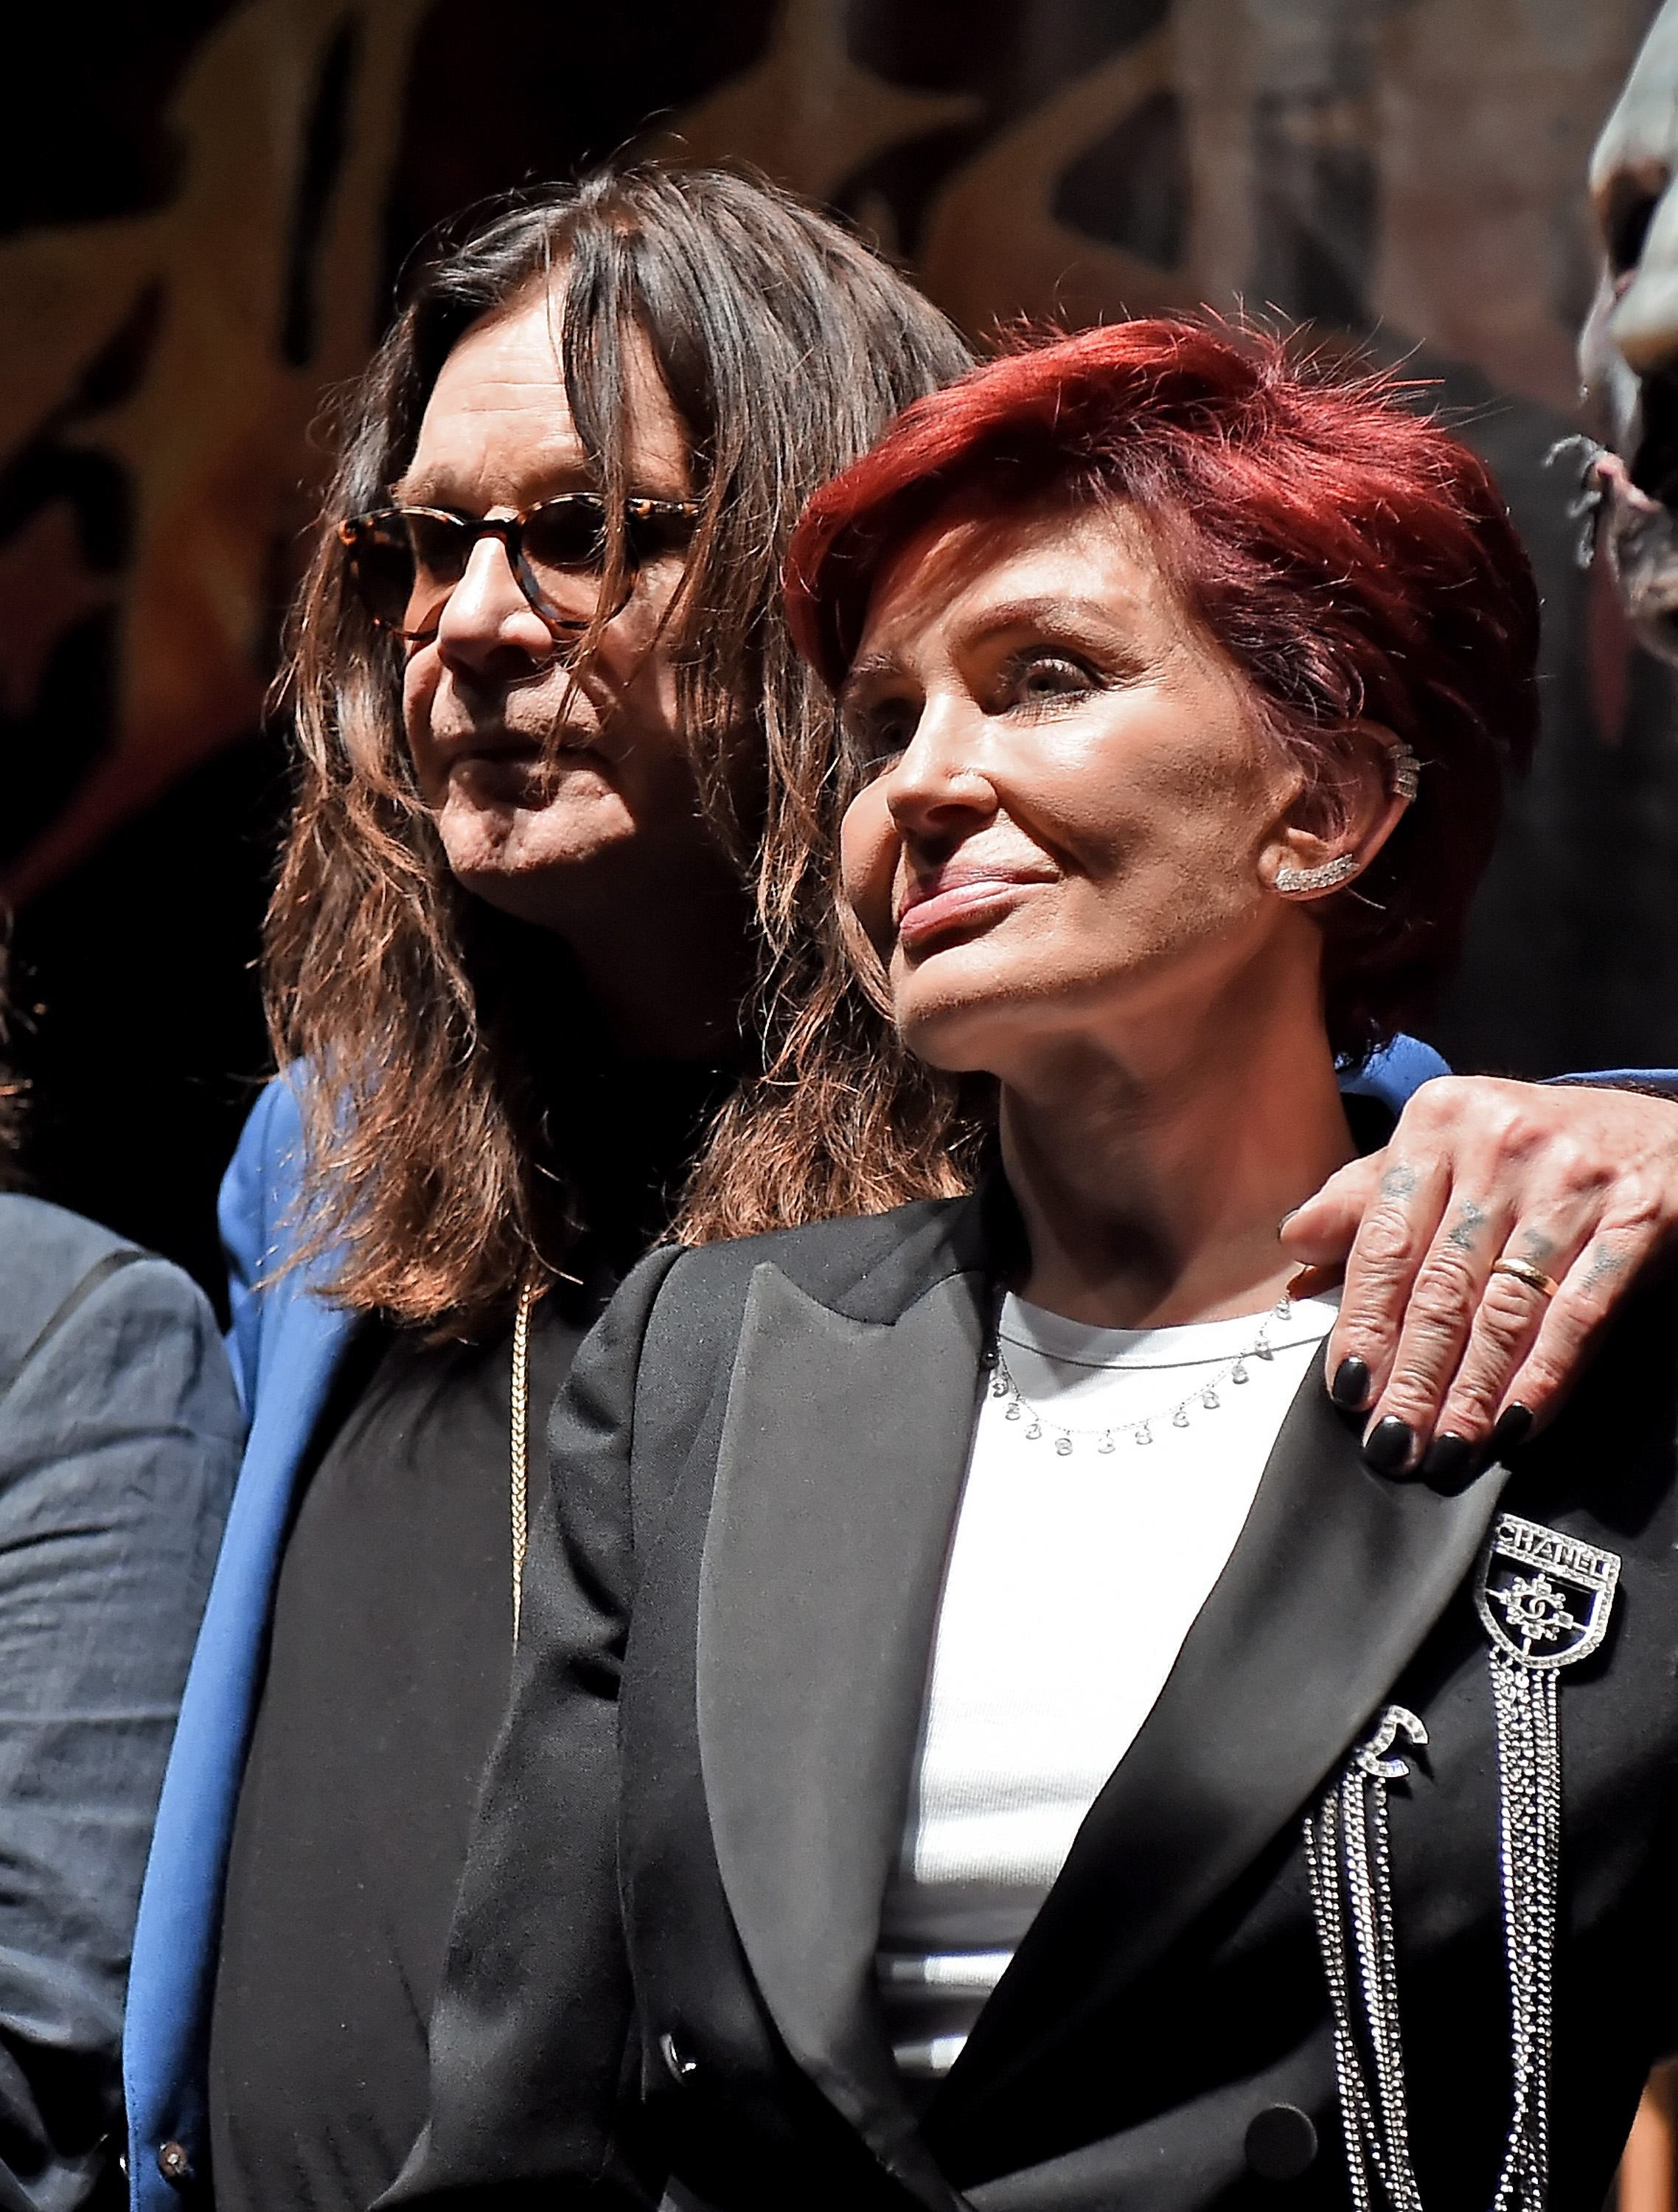 Ozzy and Sharon Osbourne attening the Ozzy Osbourne and Corey Taylor special announcement at the Hollywood Palladium in Hollywood, California, on May 12, 2016. | Source: Getty Images